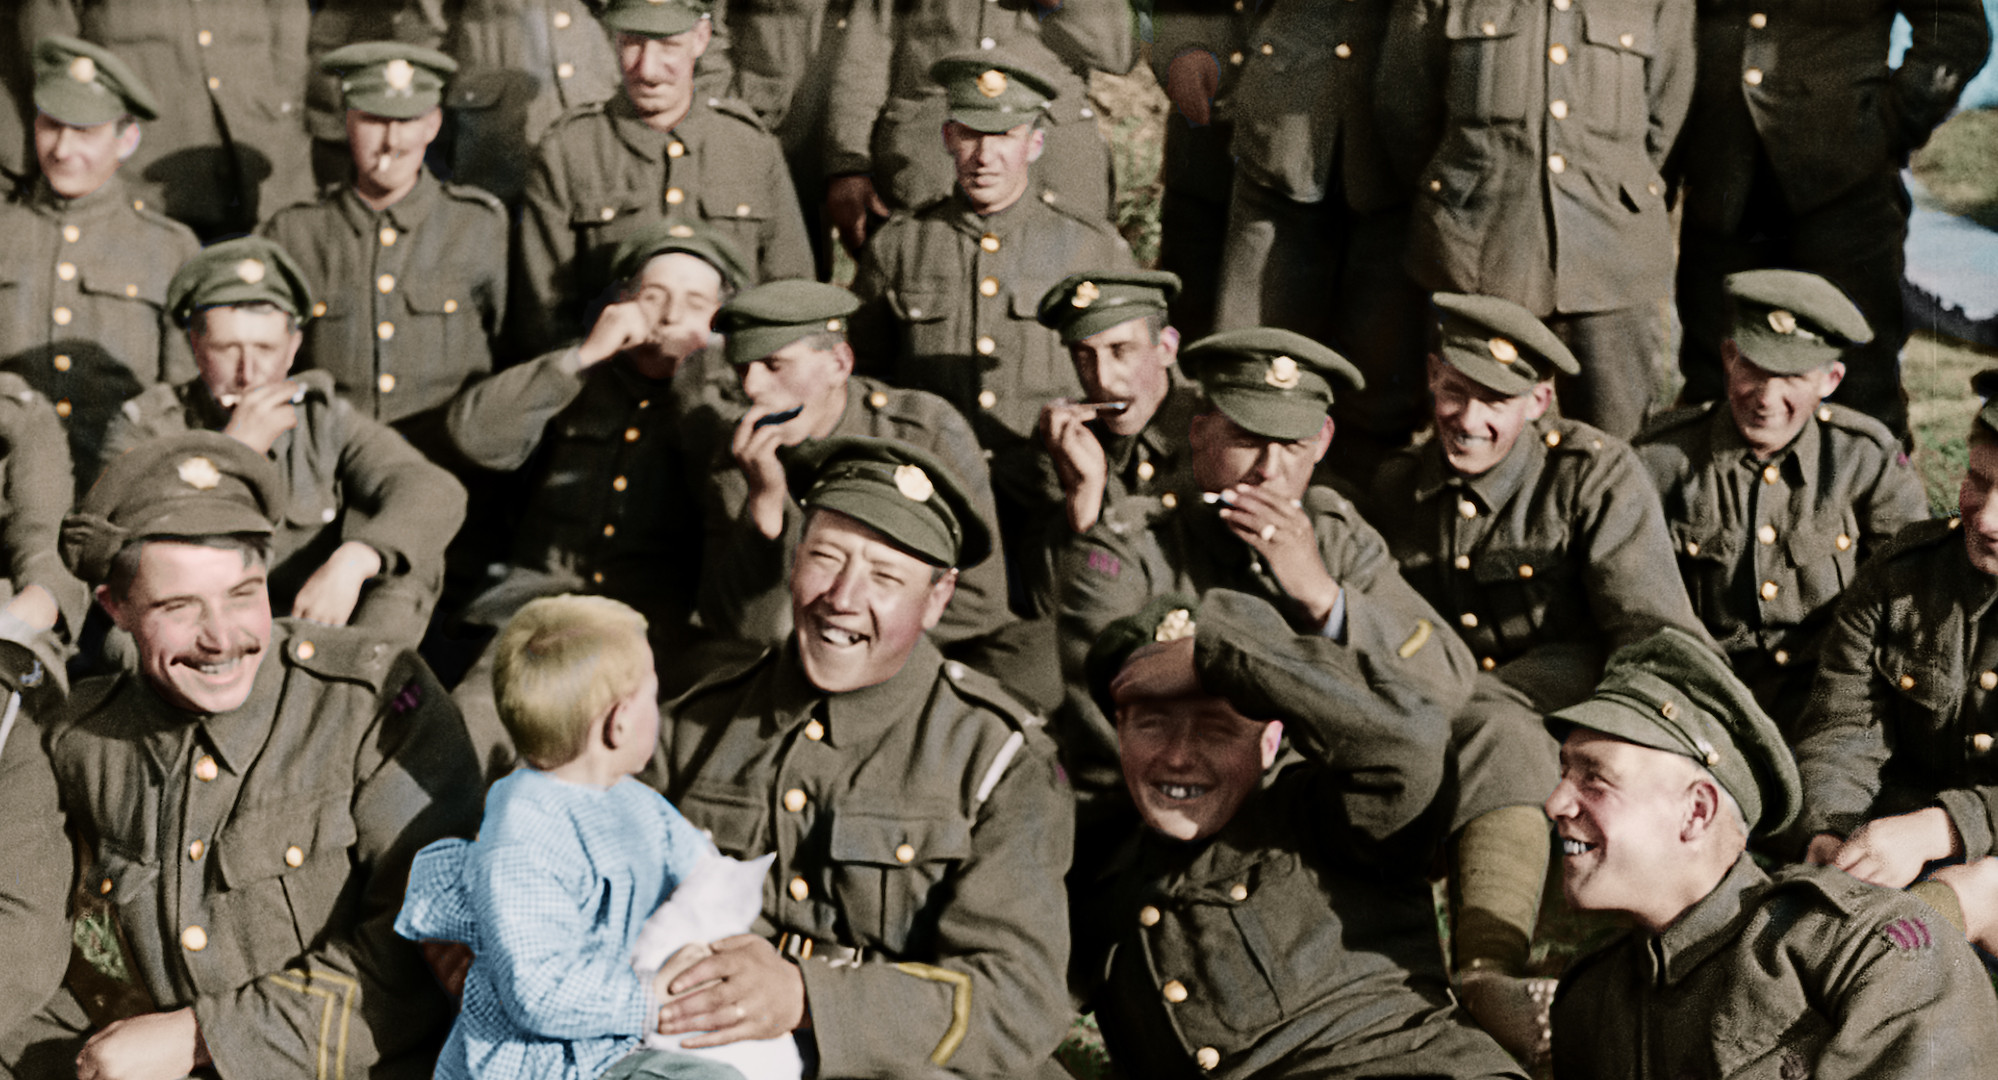 They Shall Not Grow Old: Scene Image 15